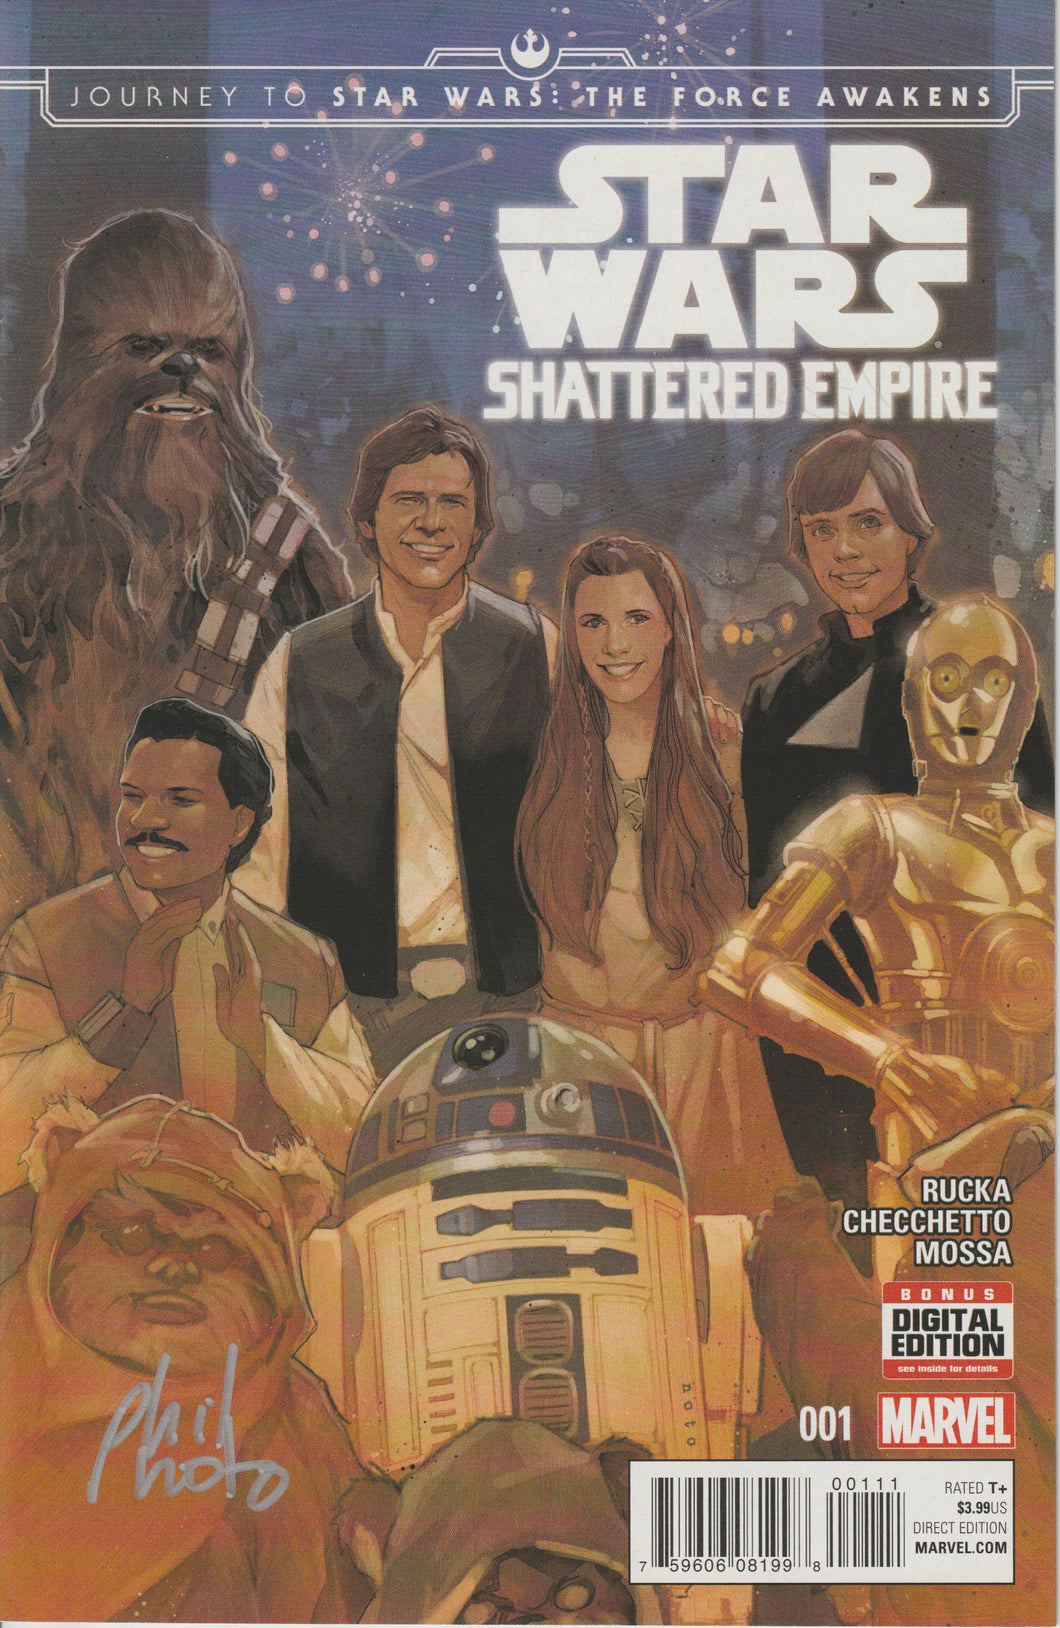 Star Wars Shattered Empire #1 signed by Phil Noto (Key issue)